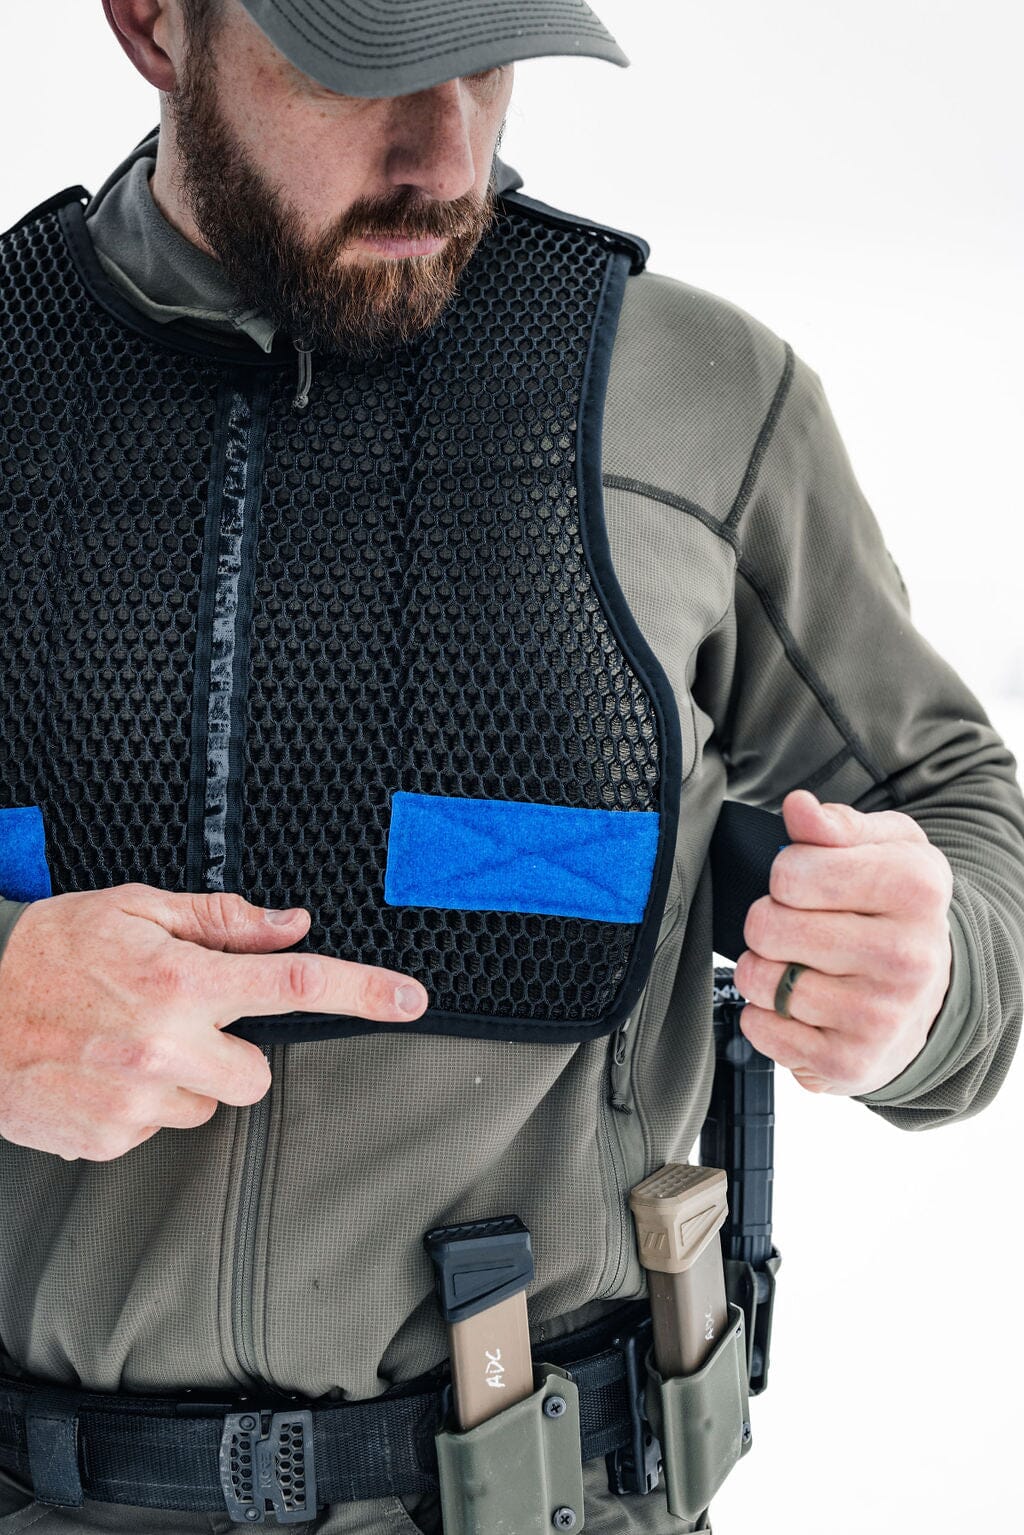 One Police Officer Invents Way To Wear Body Armor Comfortably Part 3 603042 1200x1799 ?v=1683145275